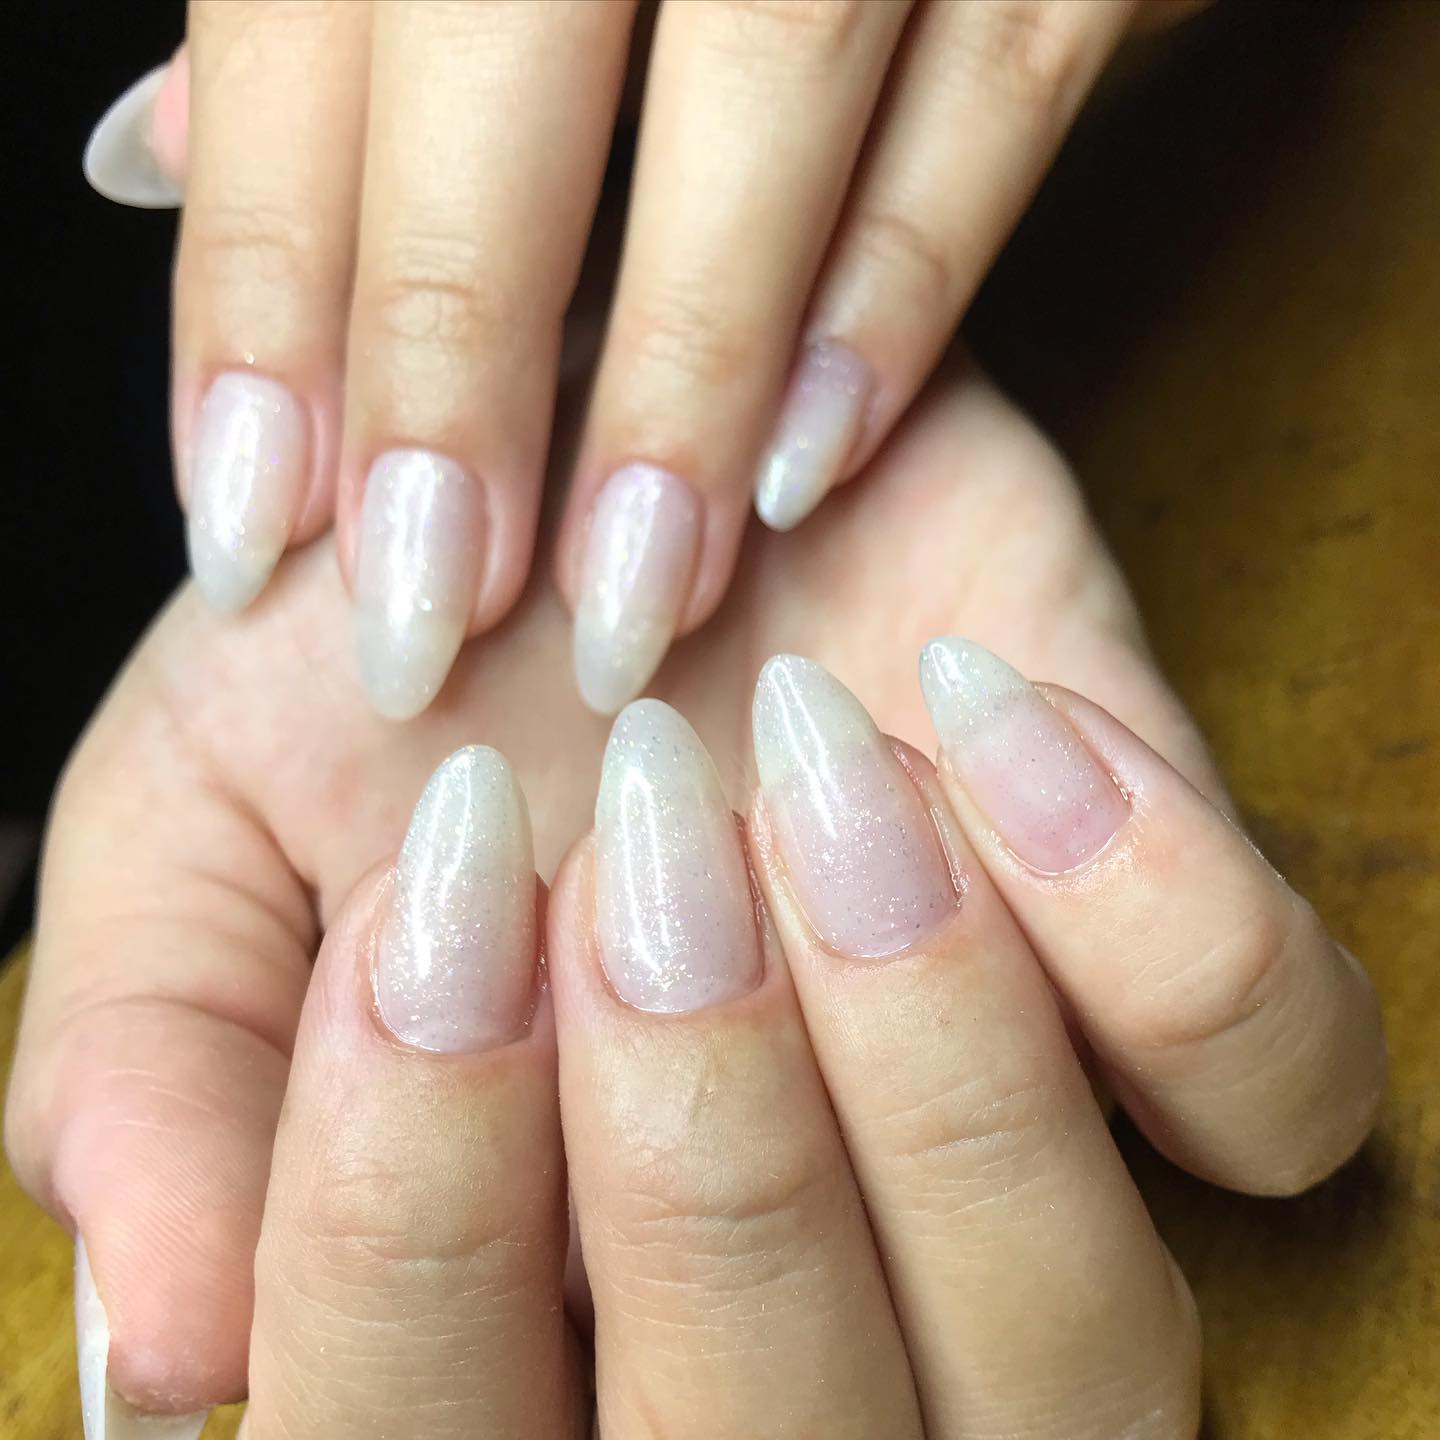 This icy white manicure is so cute and feminine, perfect for women who enjoy simple nails that they can easily do on their own.